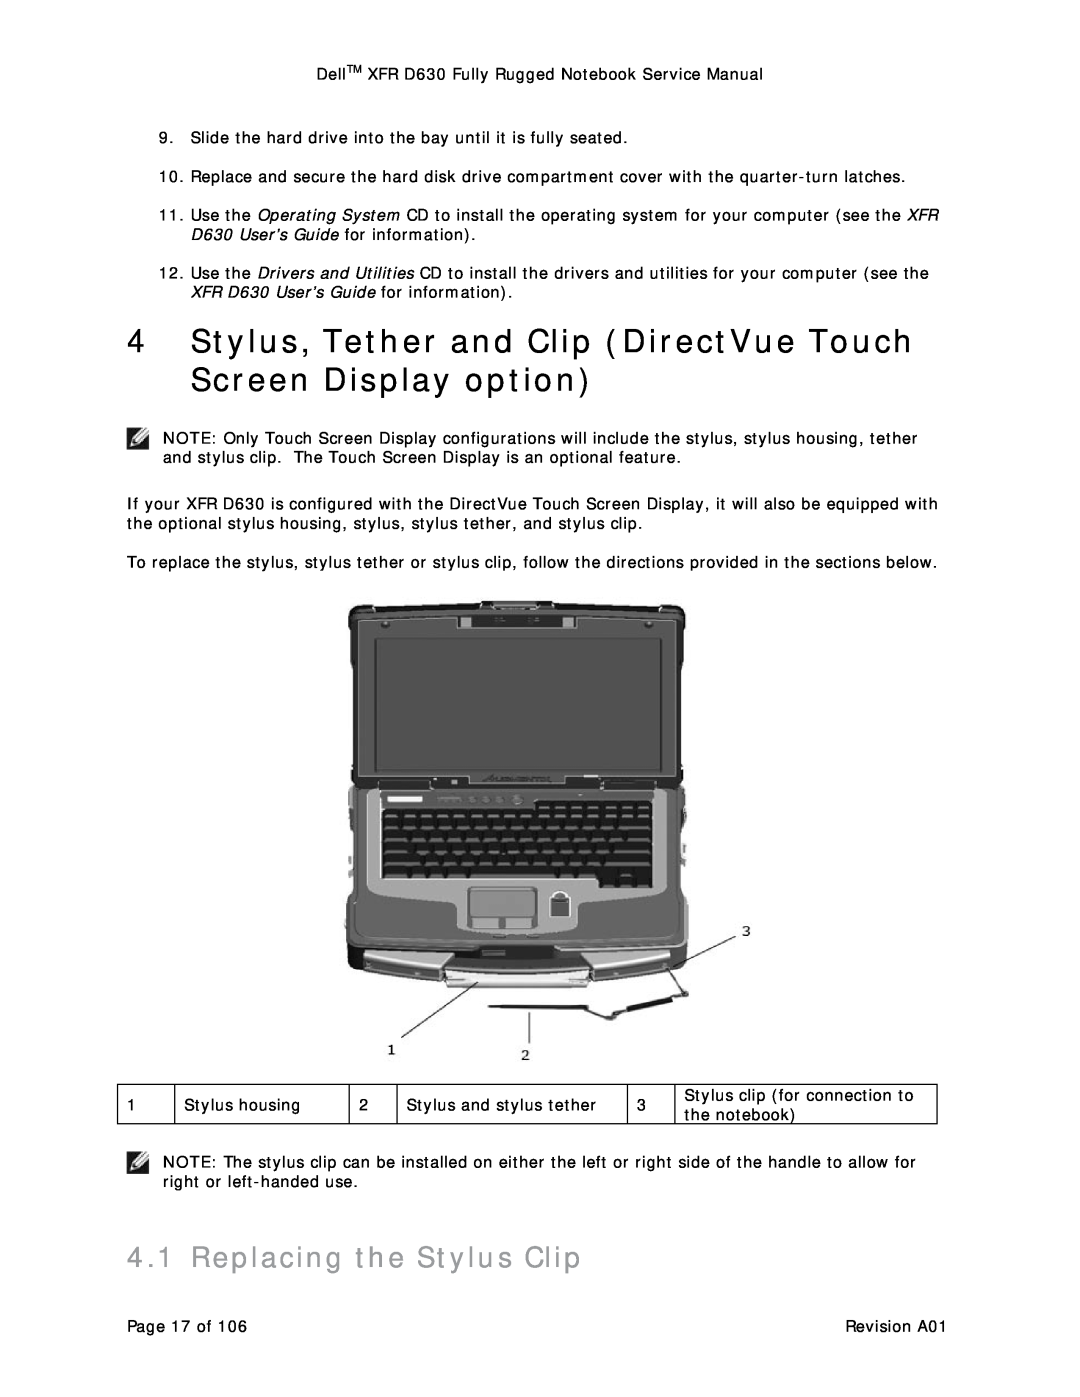 Dell D630 service manual Stylus, Tether and Clip DirectVue Touch Screen Display option, Replacing the Stylus Clip 